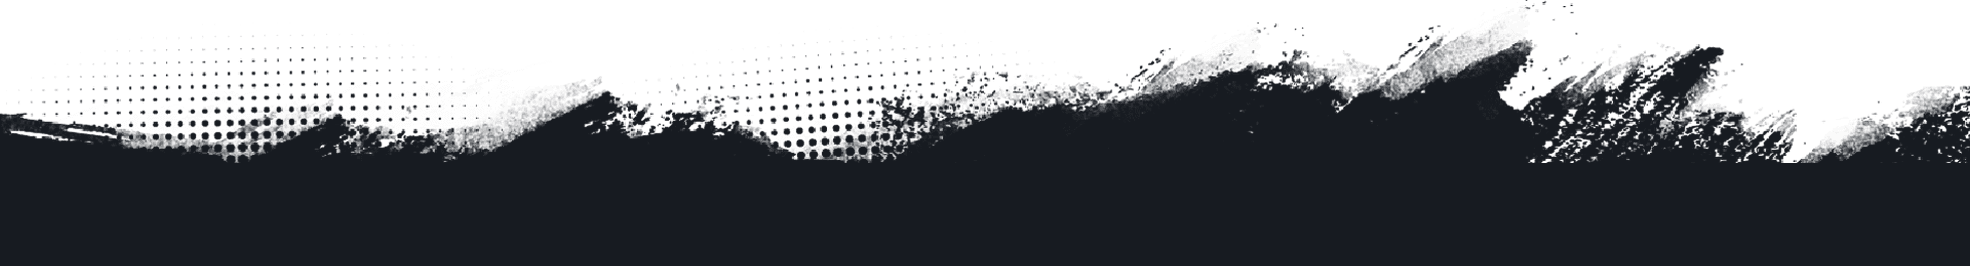 A black and green background with dots